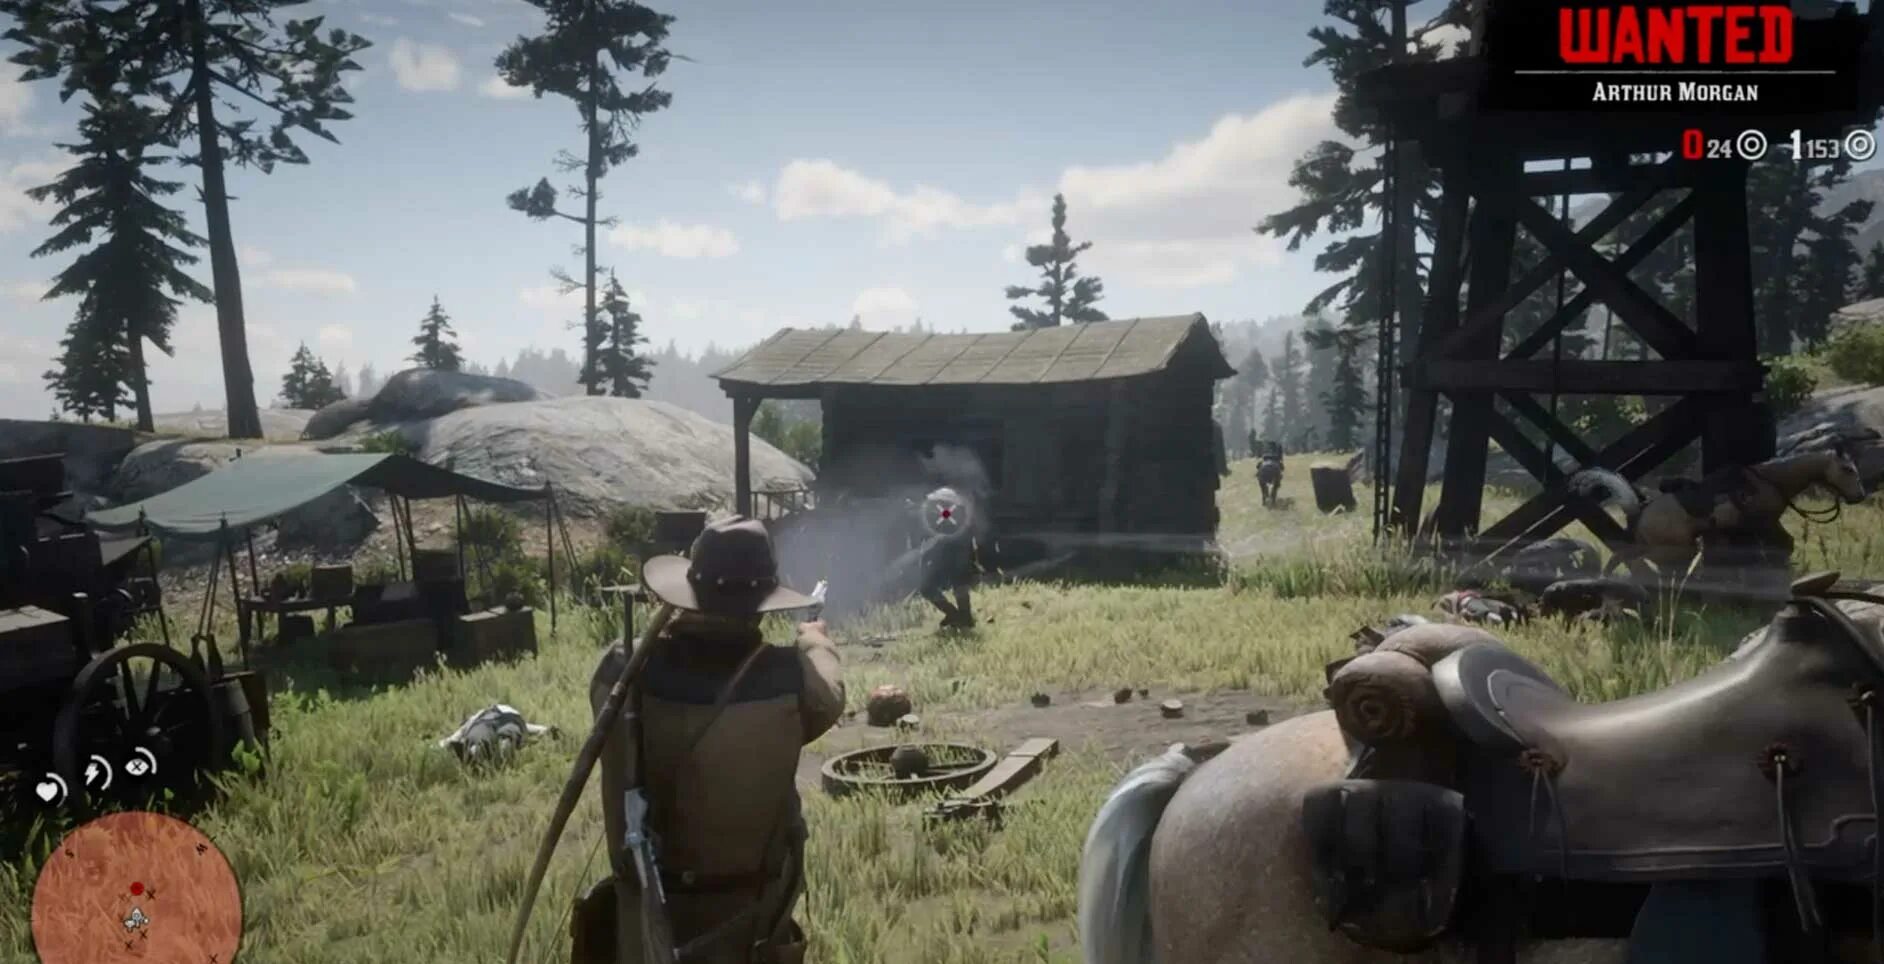 Red Dead Redemption 2 ps4. Red Dead Redemption 2 Gameplay. Ред дед редемпшн 2 геймплей. Red Dead Redemption 2 геймплей. Red gameplay